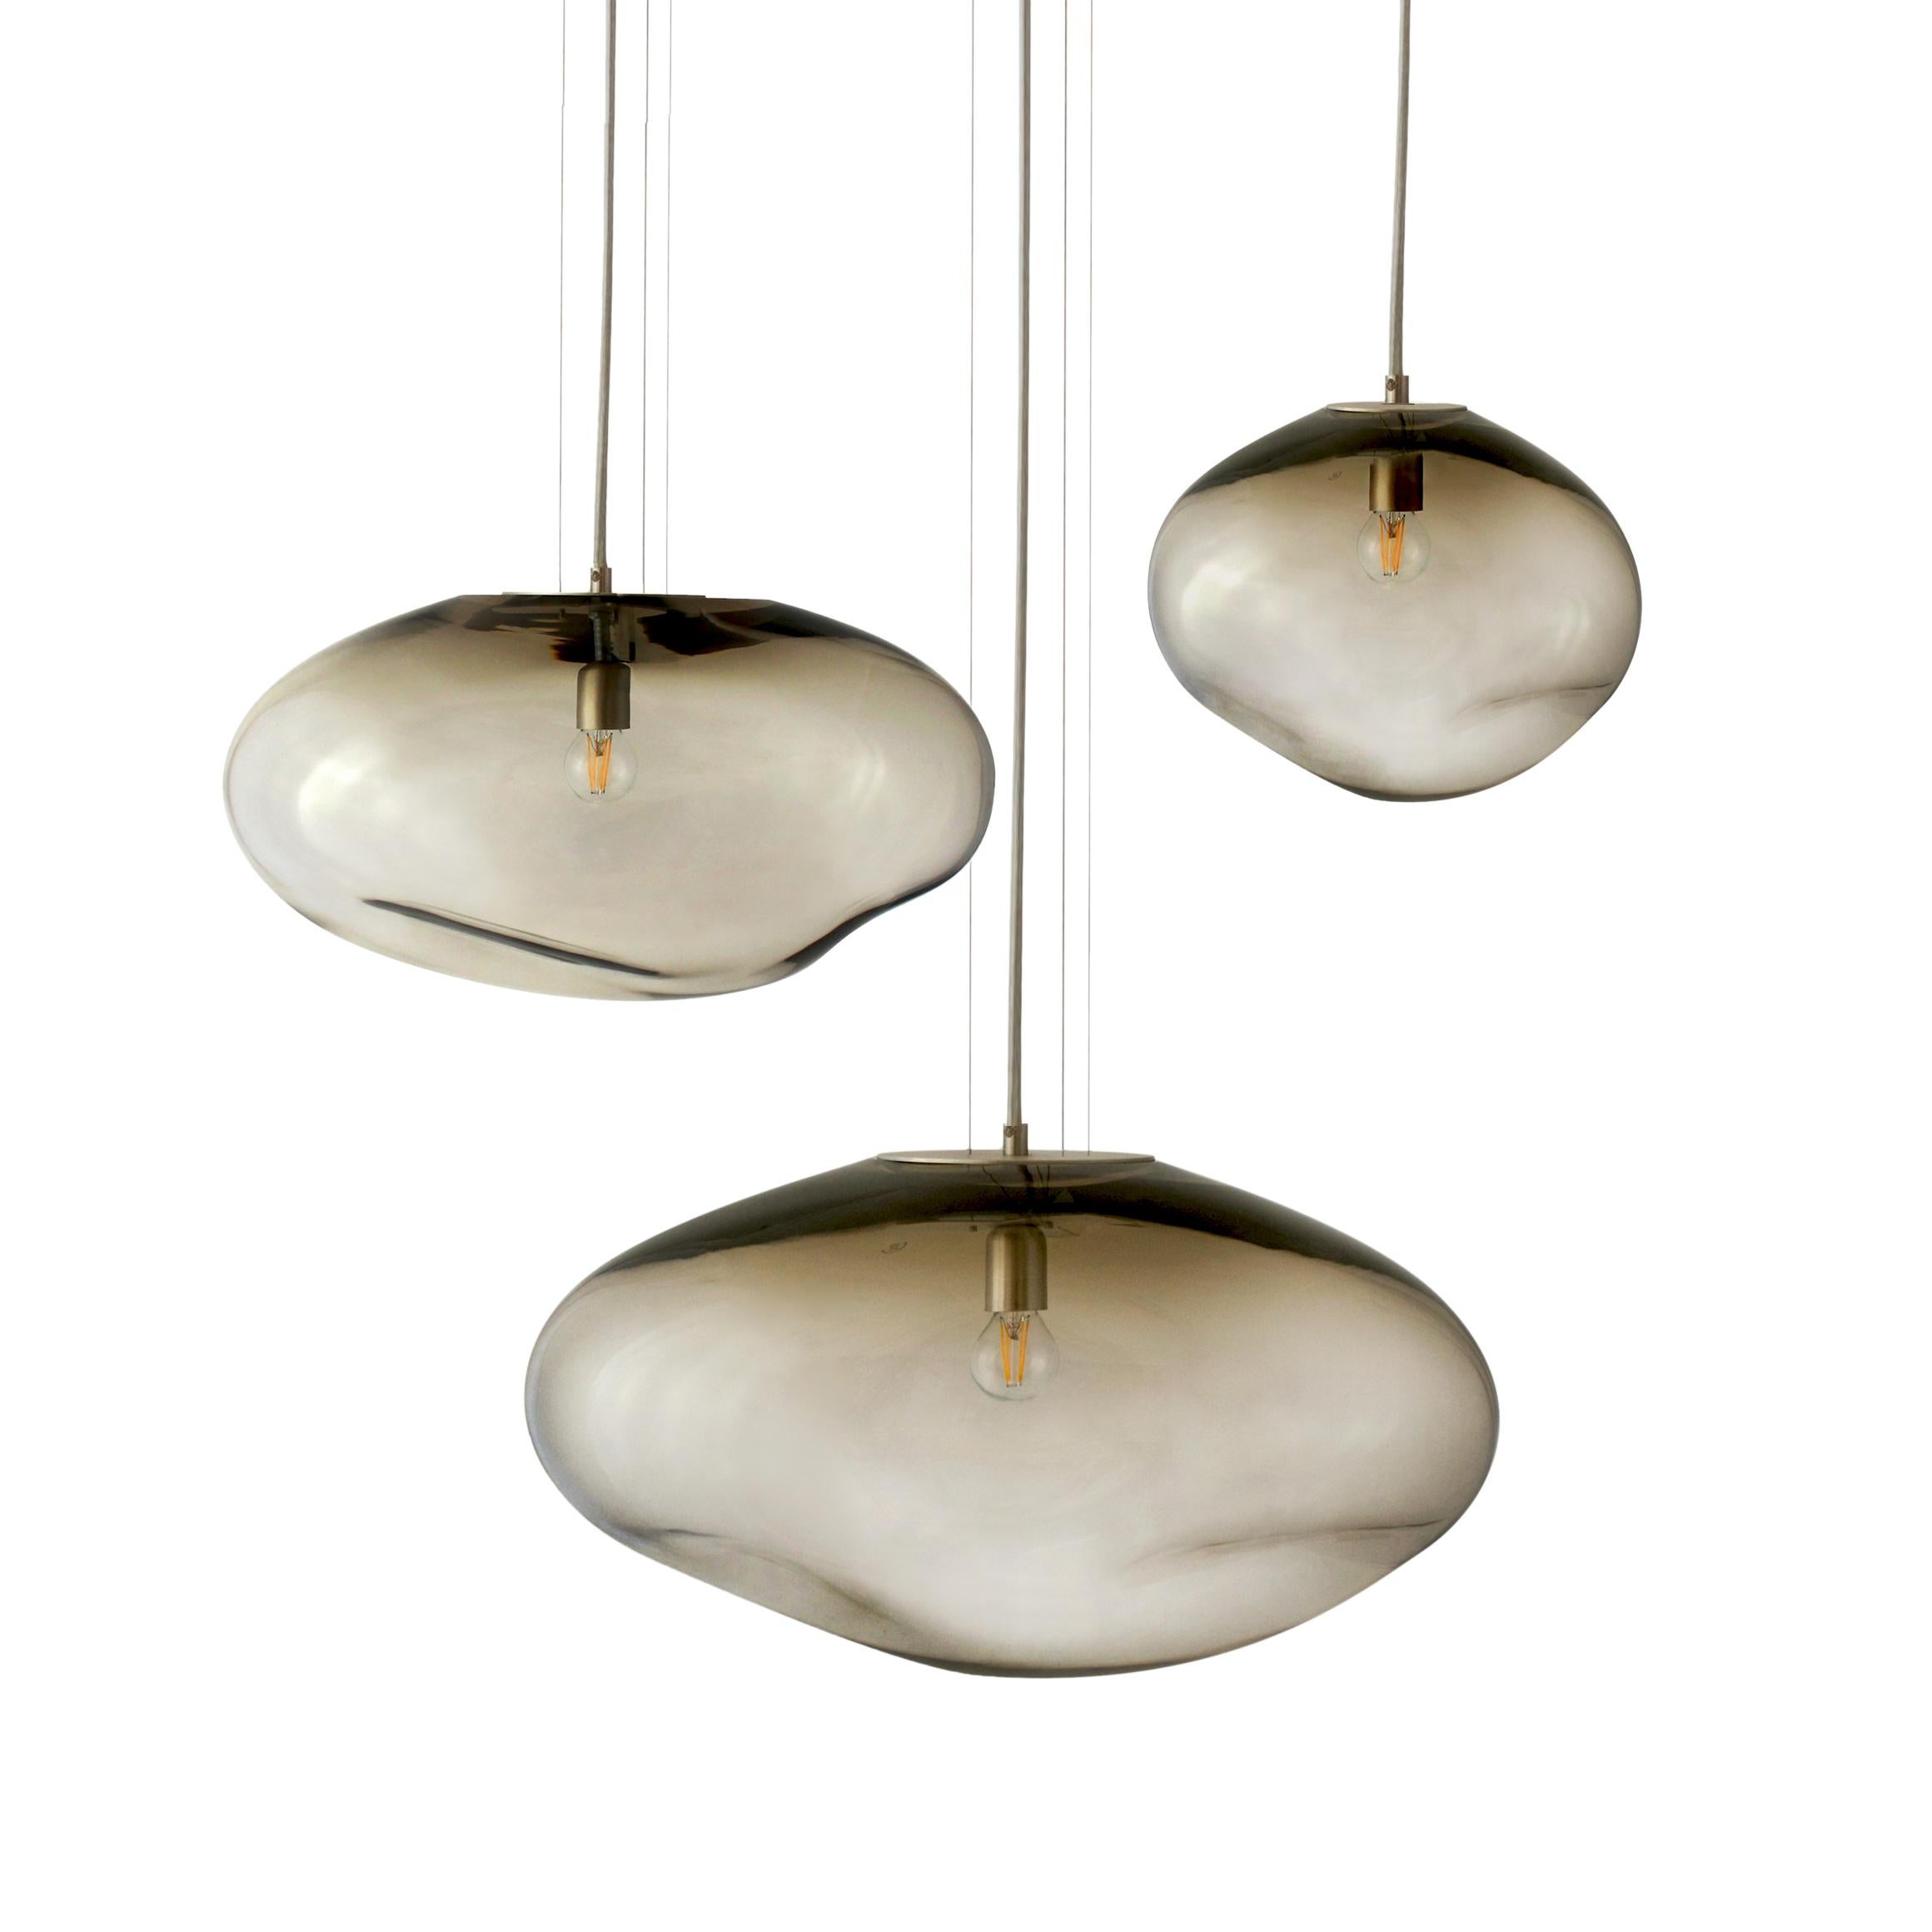 Set of 3 Haumea Amorph silver smoke M/L/ XL pendants by ELOA
No UL listed 
Material: glass, steel, silver, LED Bulb
Dimensions: D 35 x W 47 x H 32 / D 27 x W 39 x H 30/ D 30 x W 32 x H 27 cm
Also available in different colours and dimensions.

All